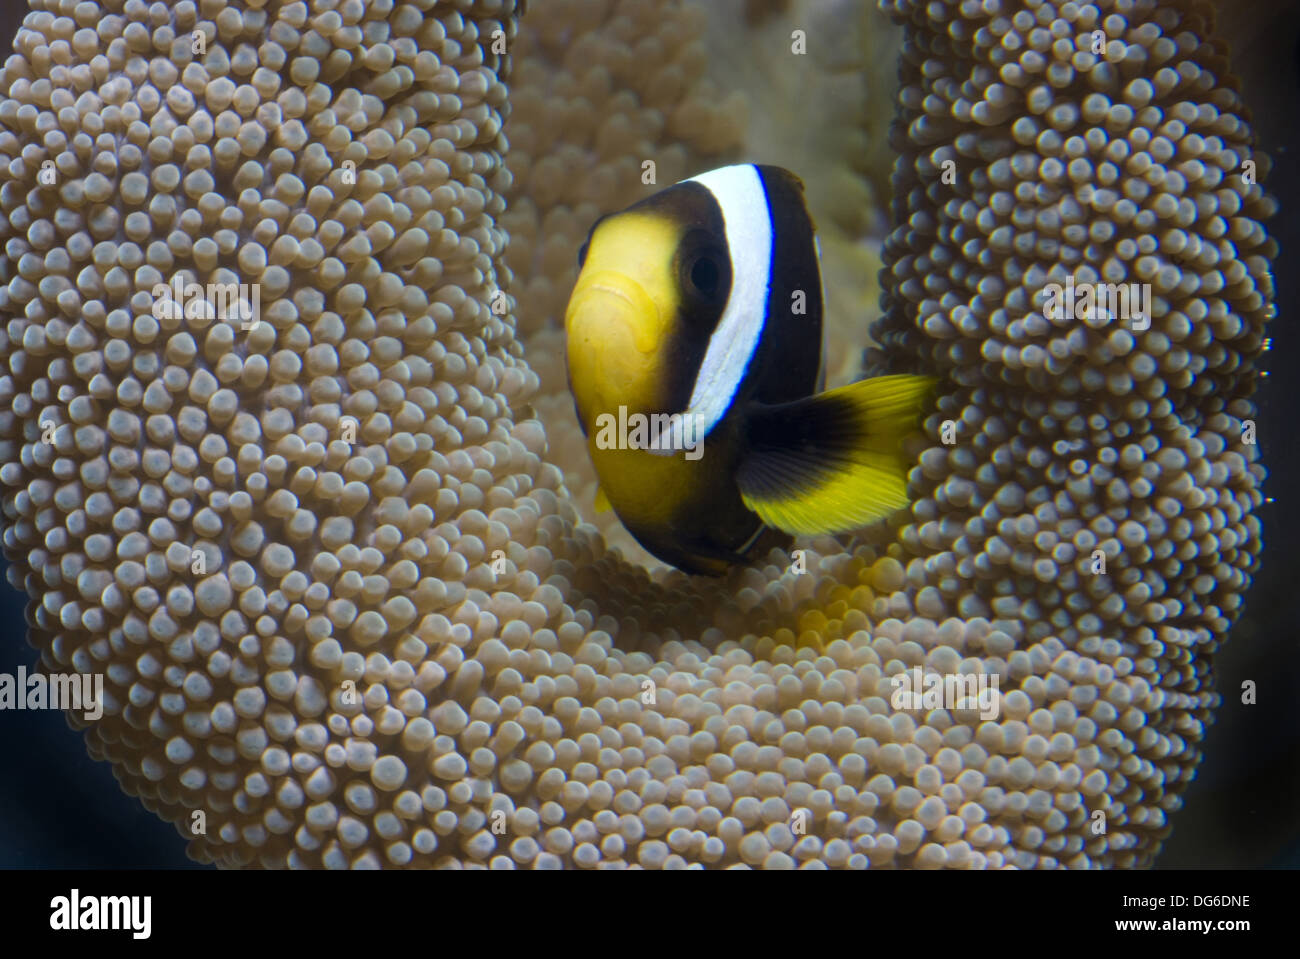 Maurizio, anemonefish amphiprion chrysogaster Foto Stock